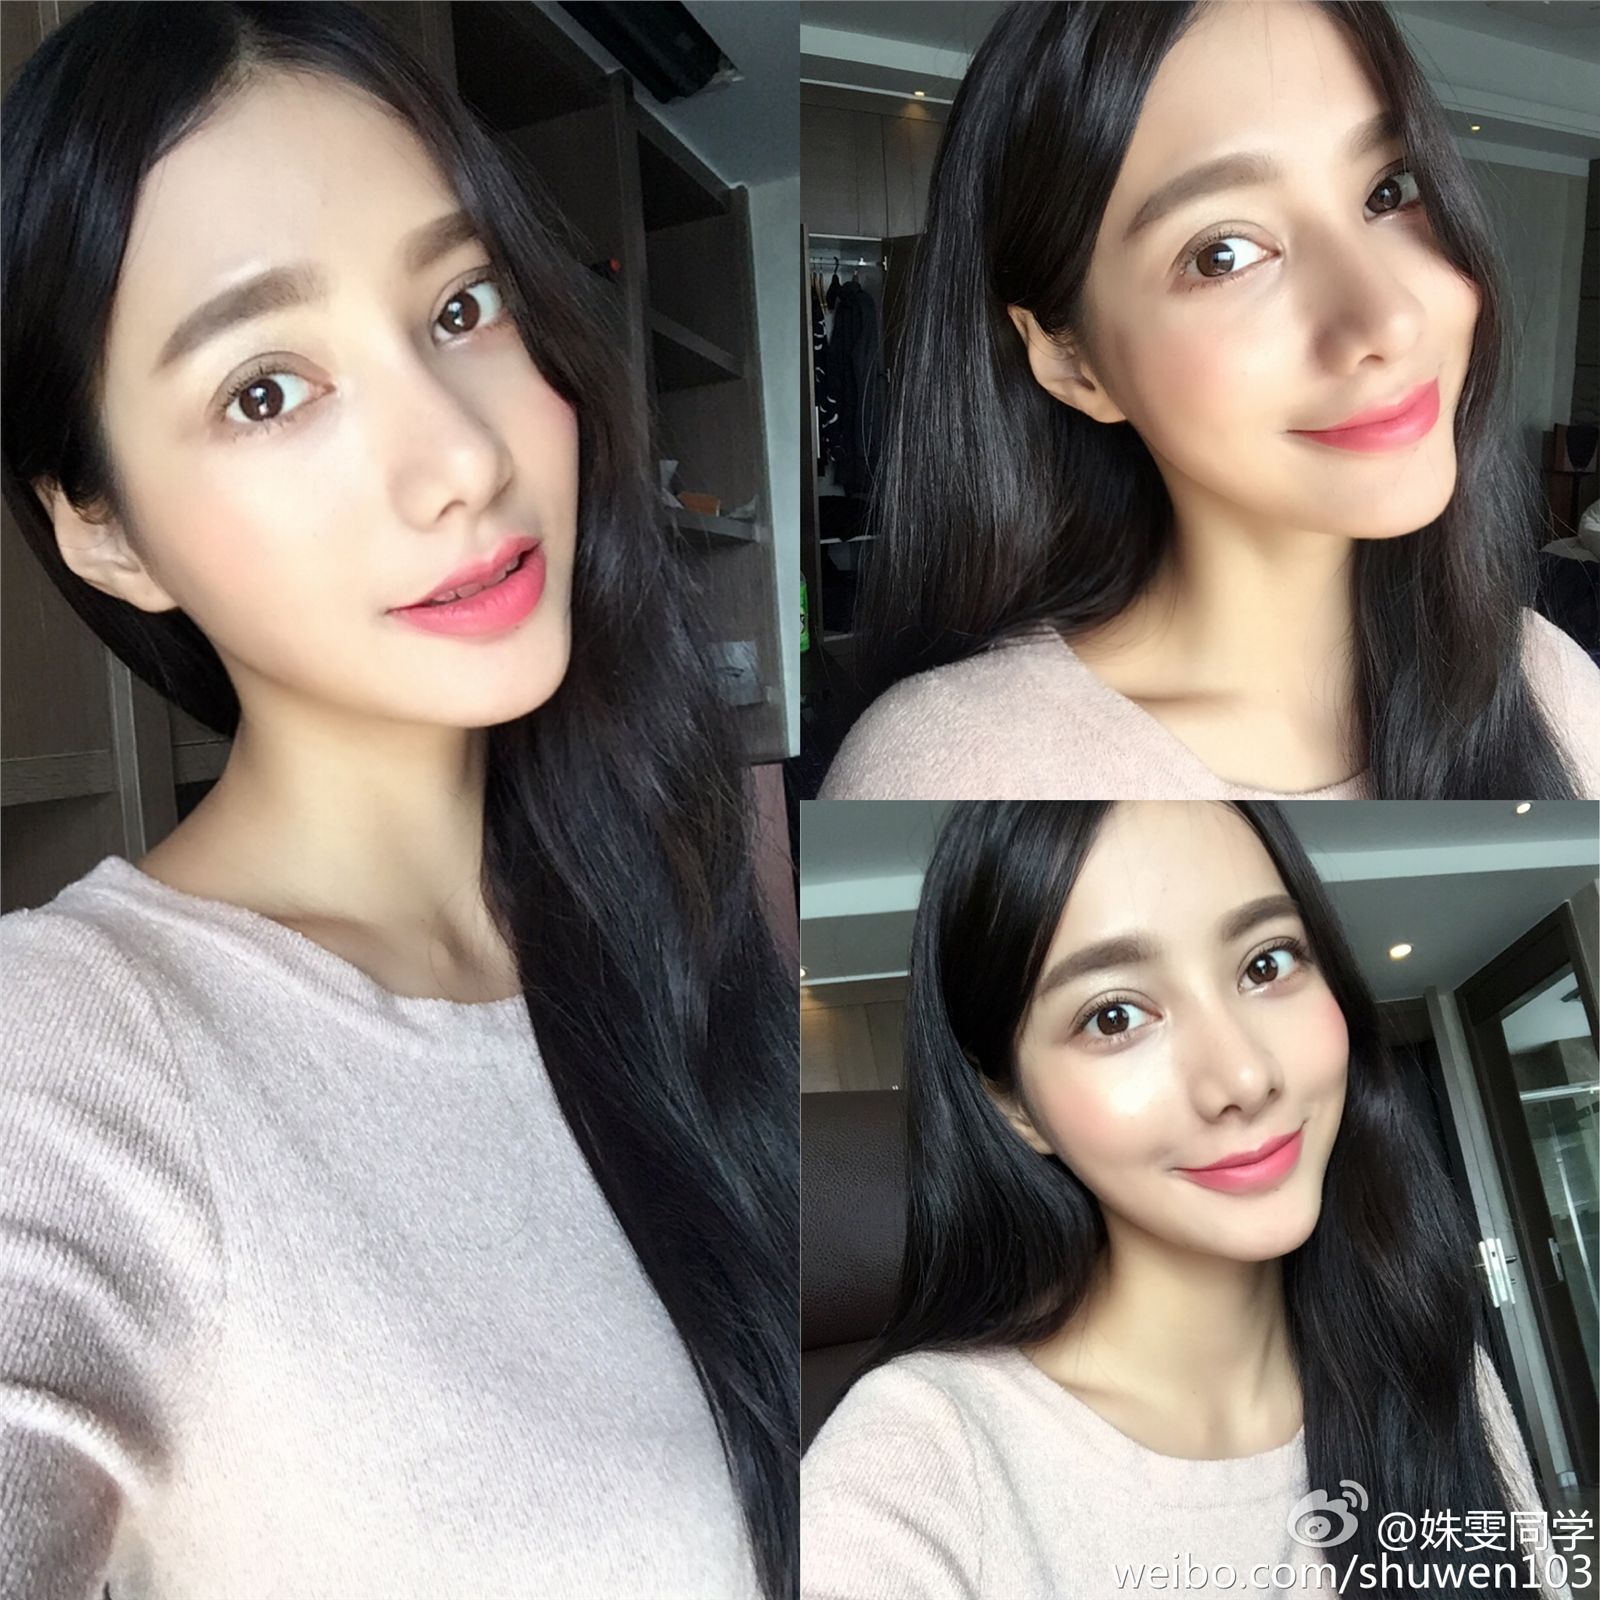 Shu Wen, a Chinese Russian mixed blood student of Fu Normal University, became popular in private photo 2